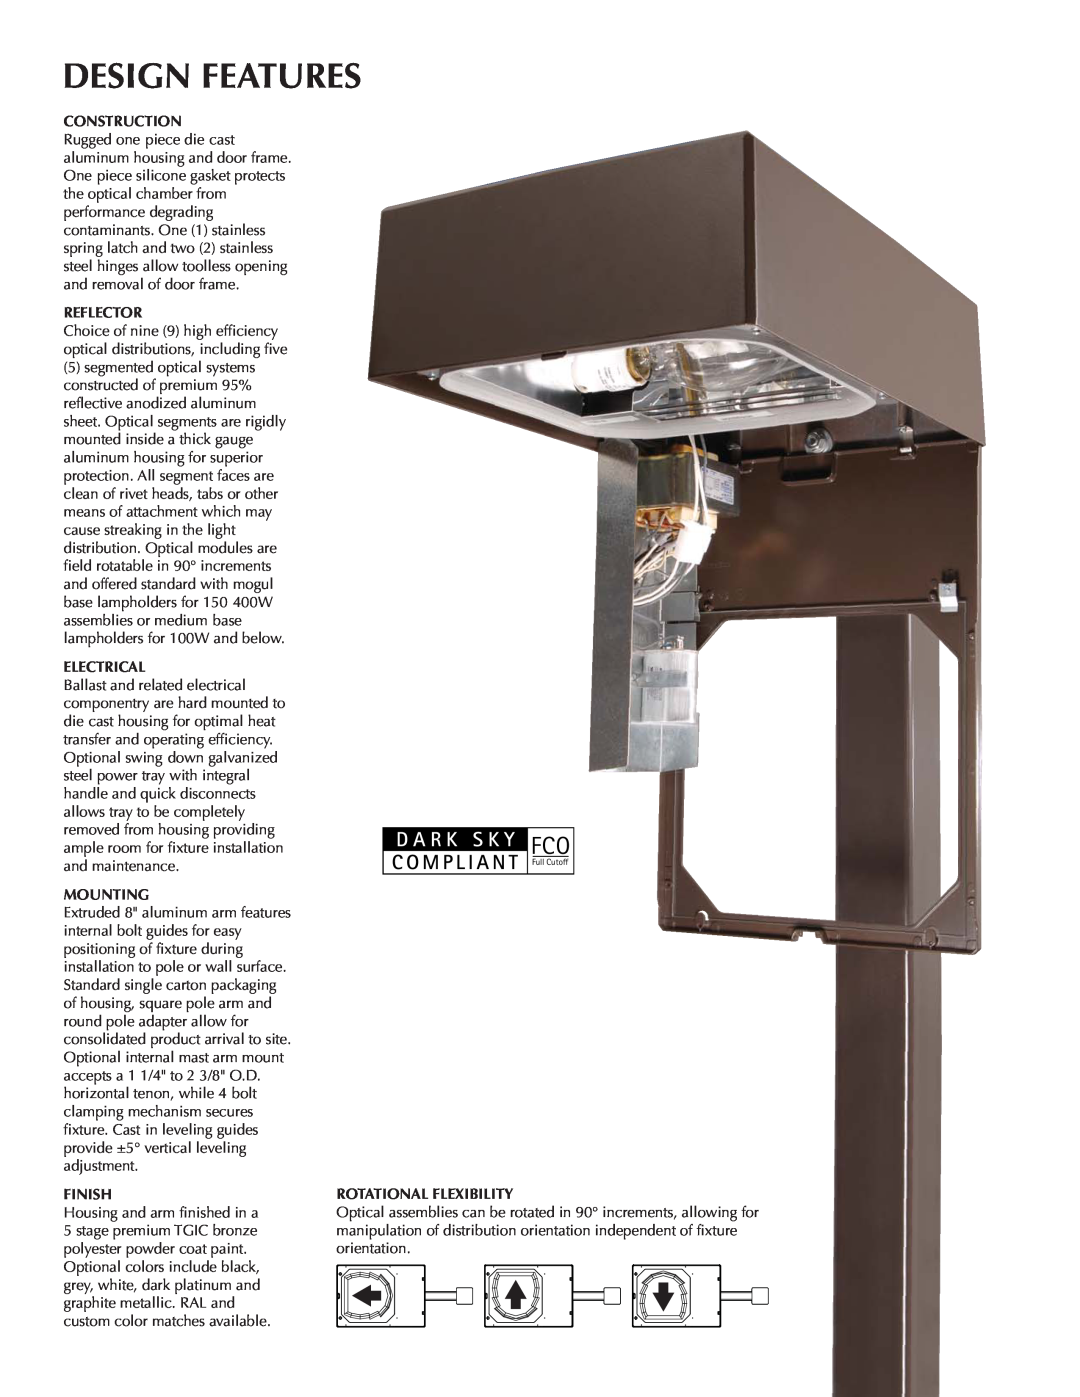 Cooper Lighting Tribute manual D A R K S K Y, Design Features, C O M P L I A N T, Reflector, Electrical, Mounting, Finish 